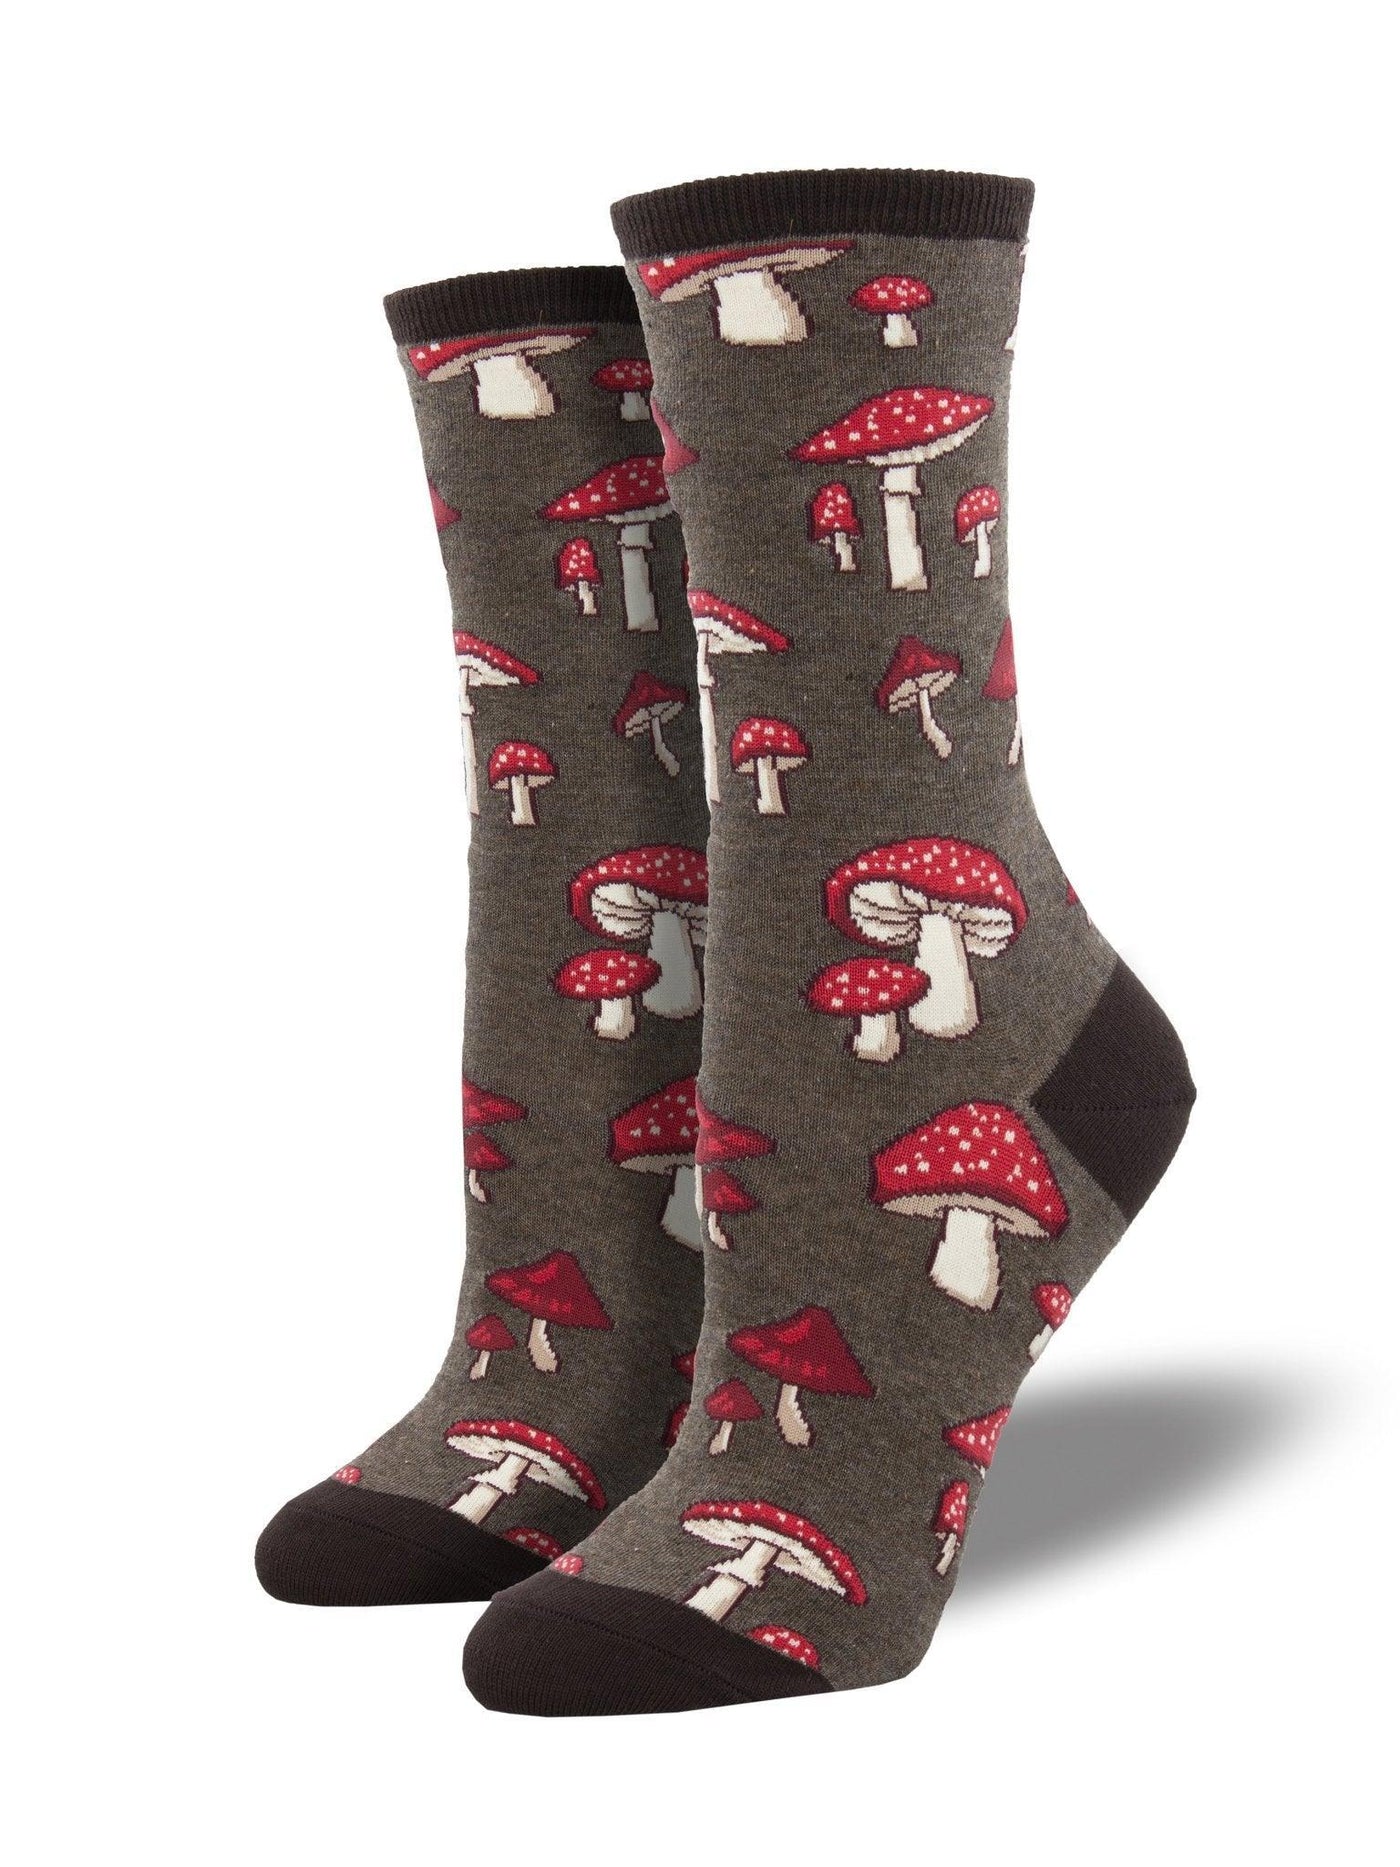 Pretty Fly For A Fungi, Women's Crew - Socksmith - The Sock Monster